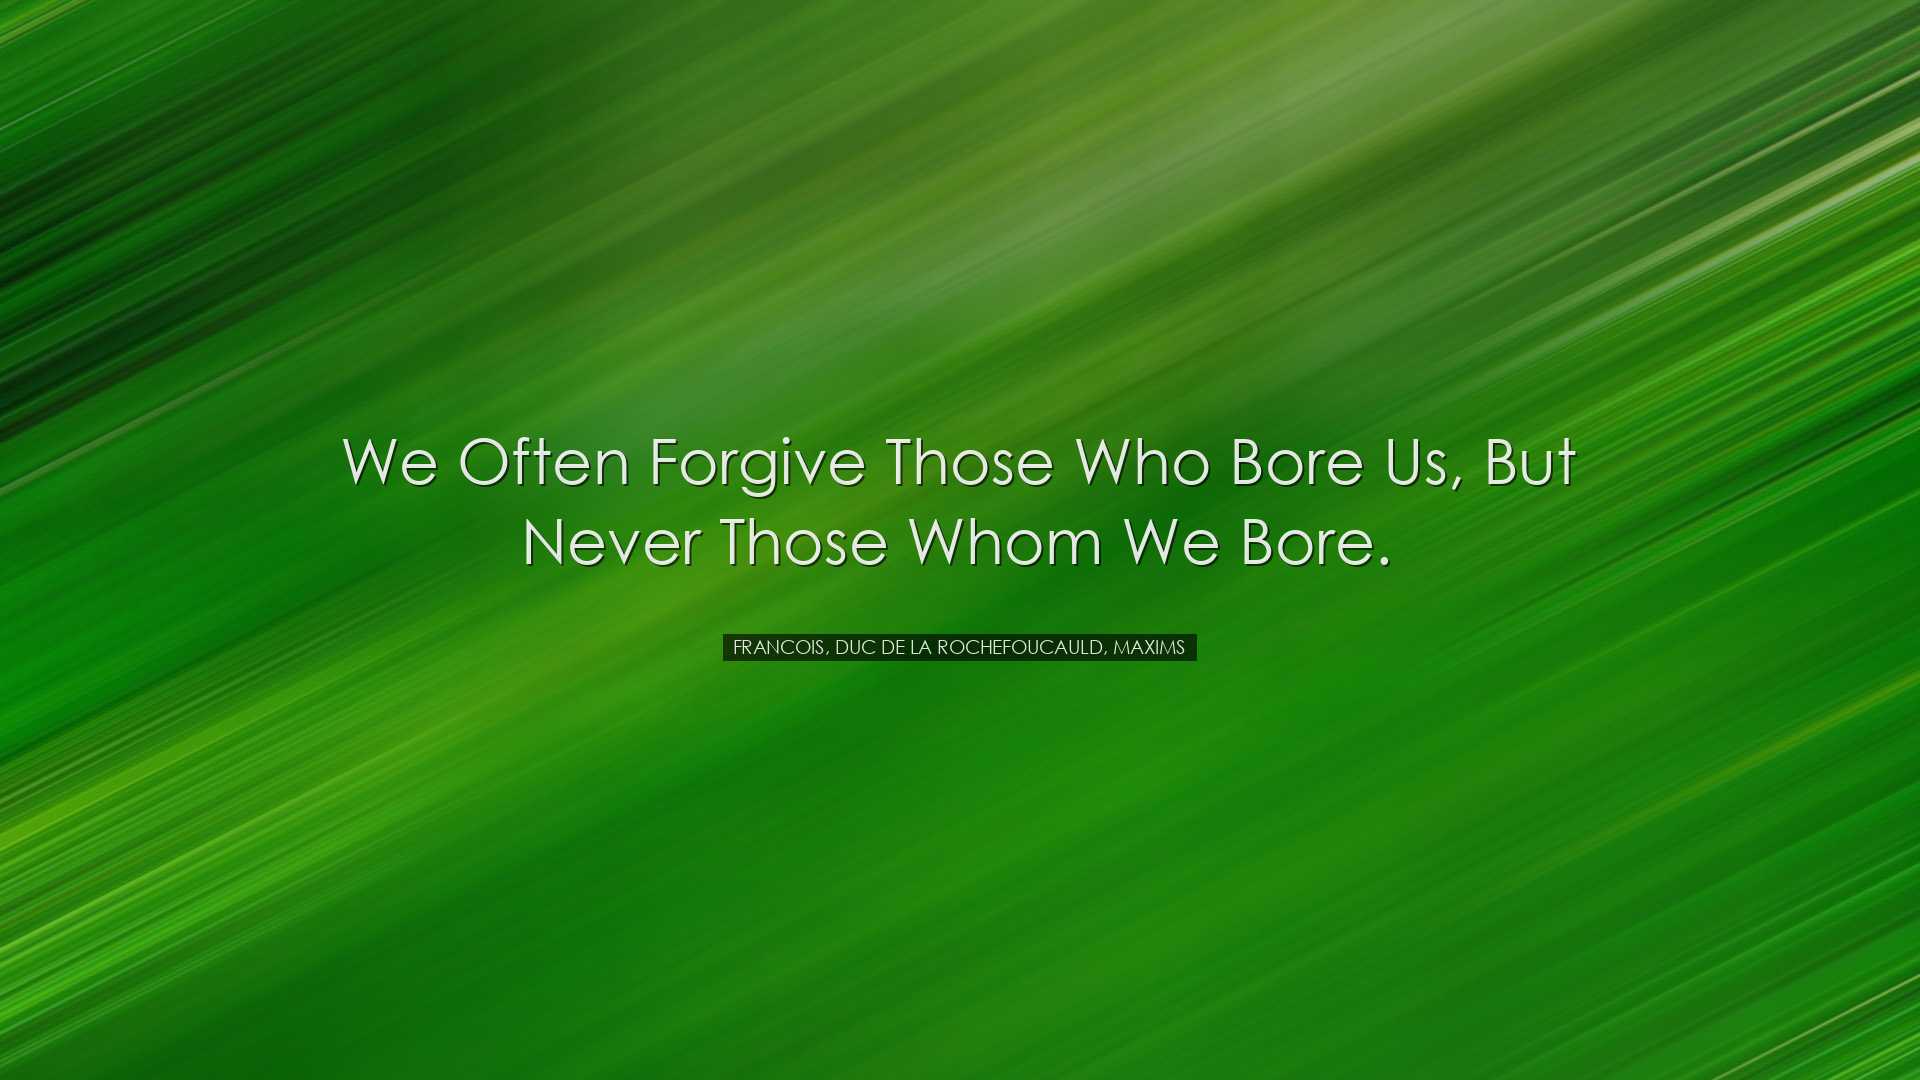 We often forgive those who bore us, but never those whom we bore.